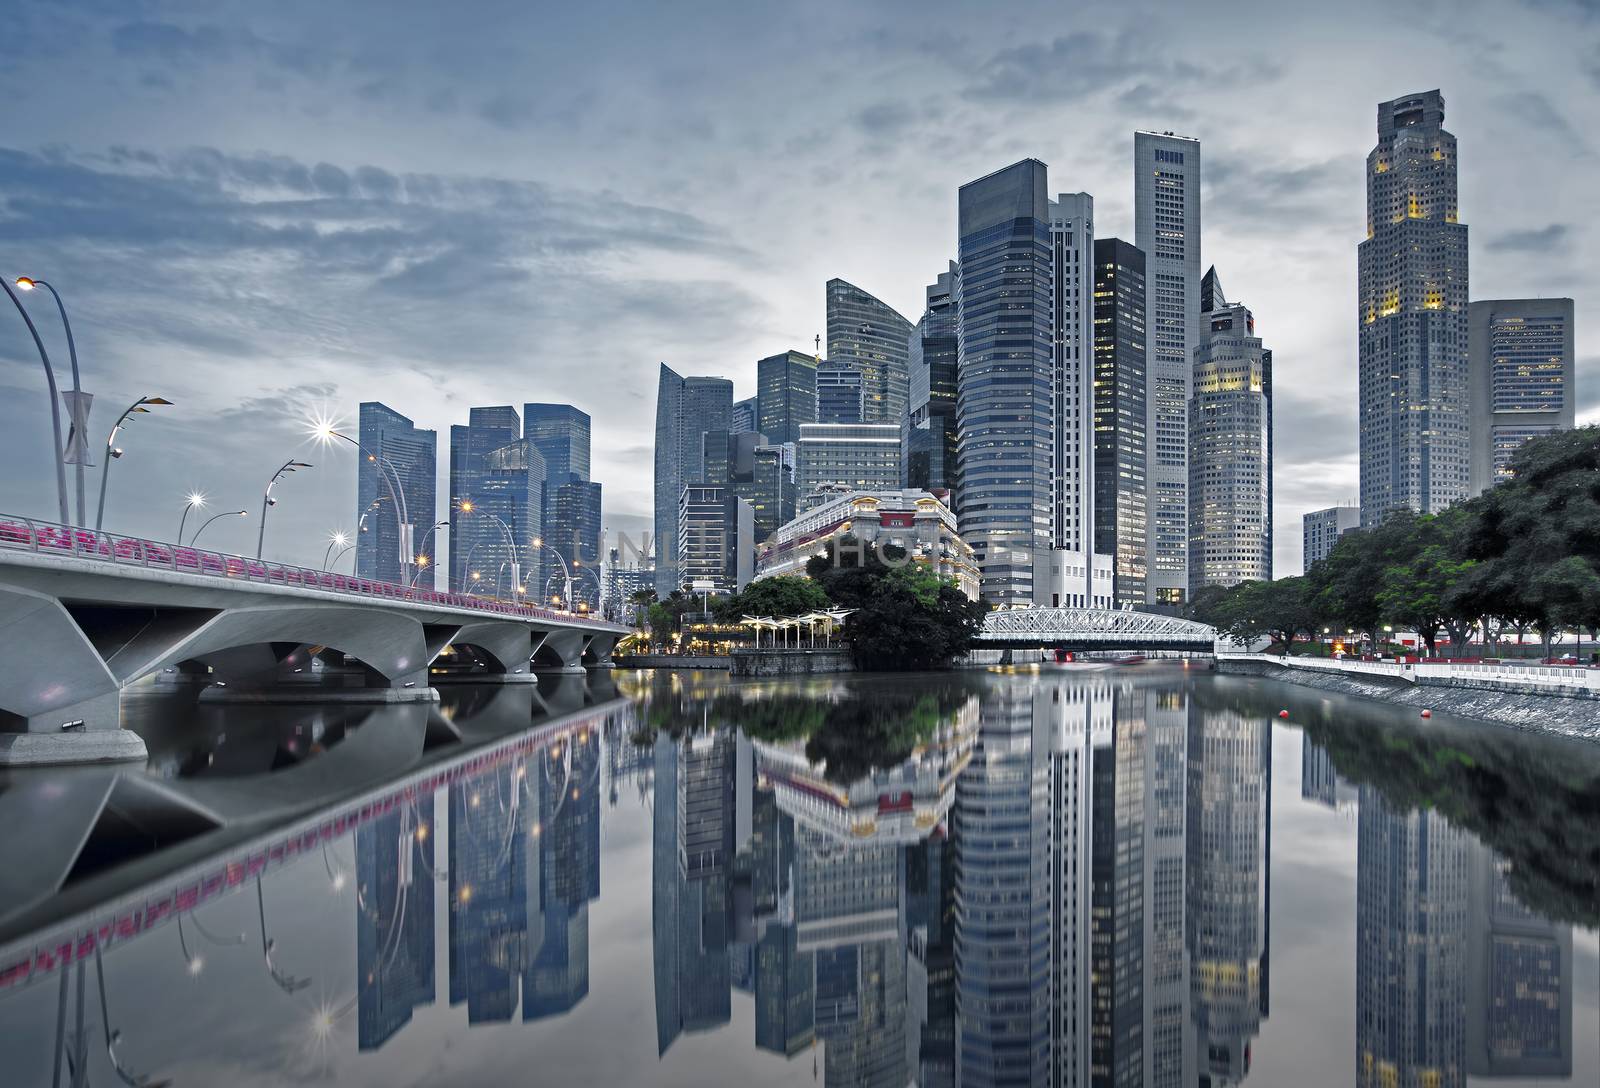 Singapore cityscape casting reflections in the early morning